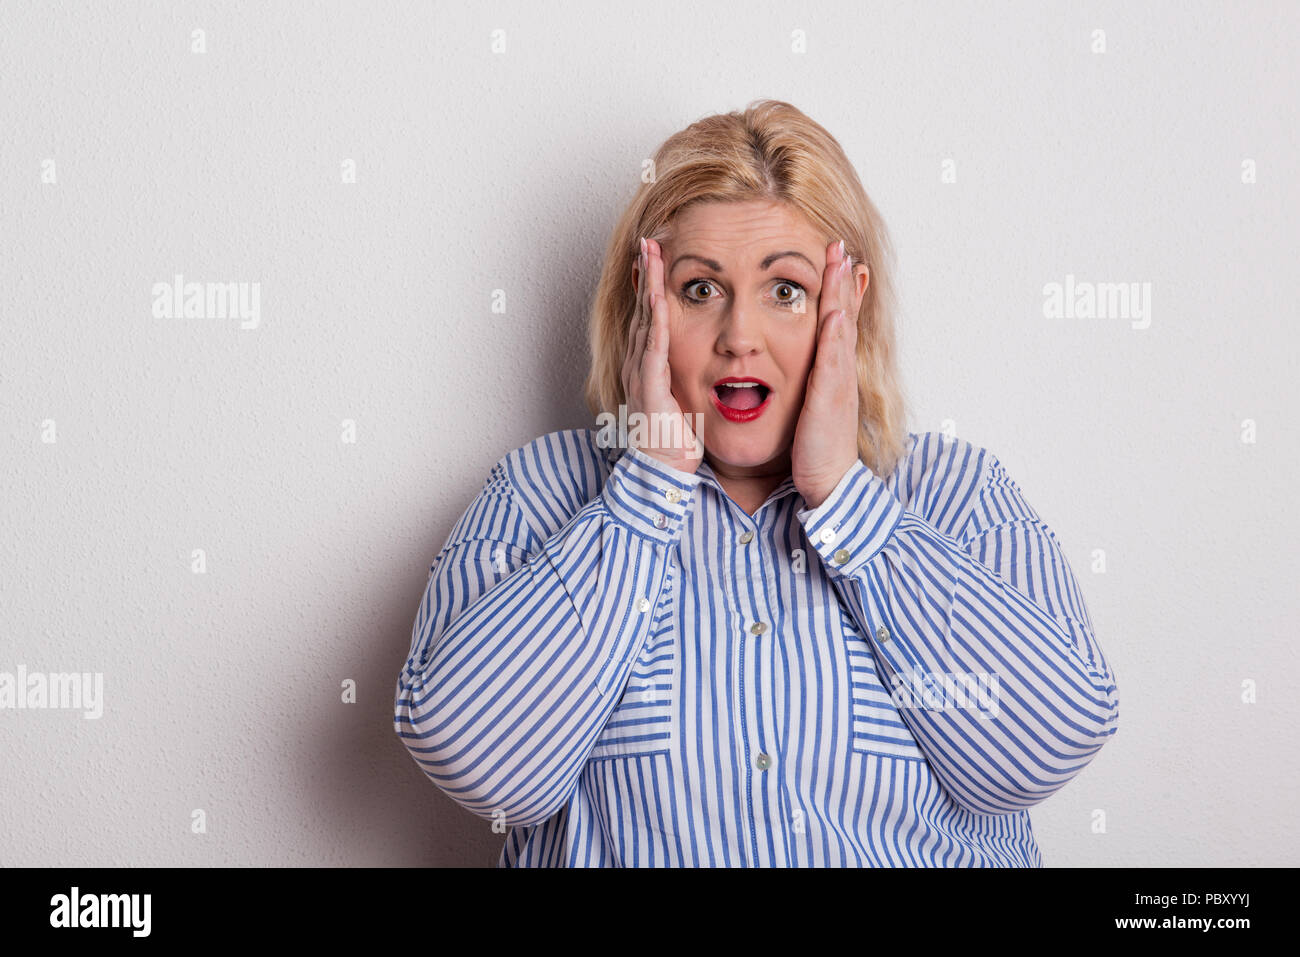 Portrait of a scared overweight woman in studio, hands on cheeks. Stock Photo